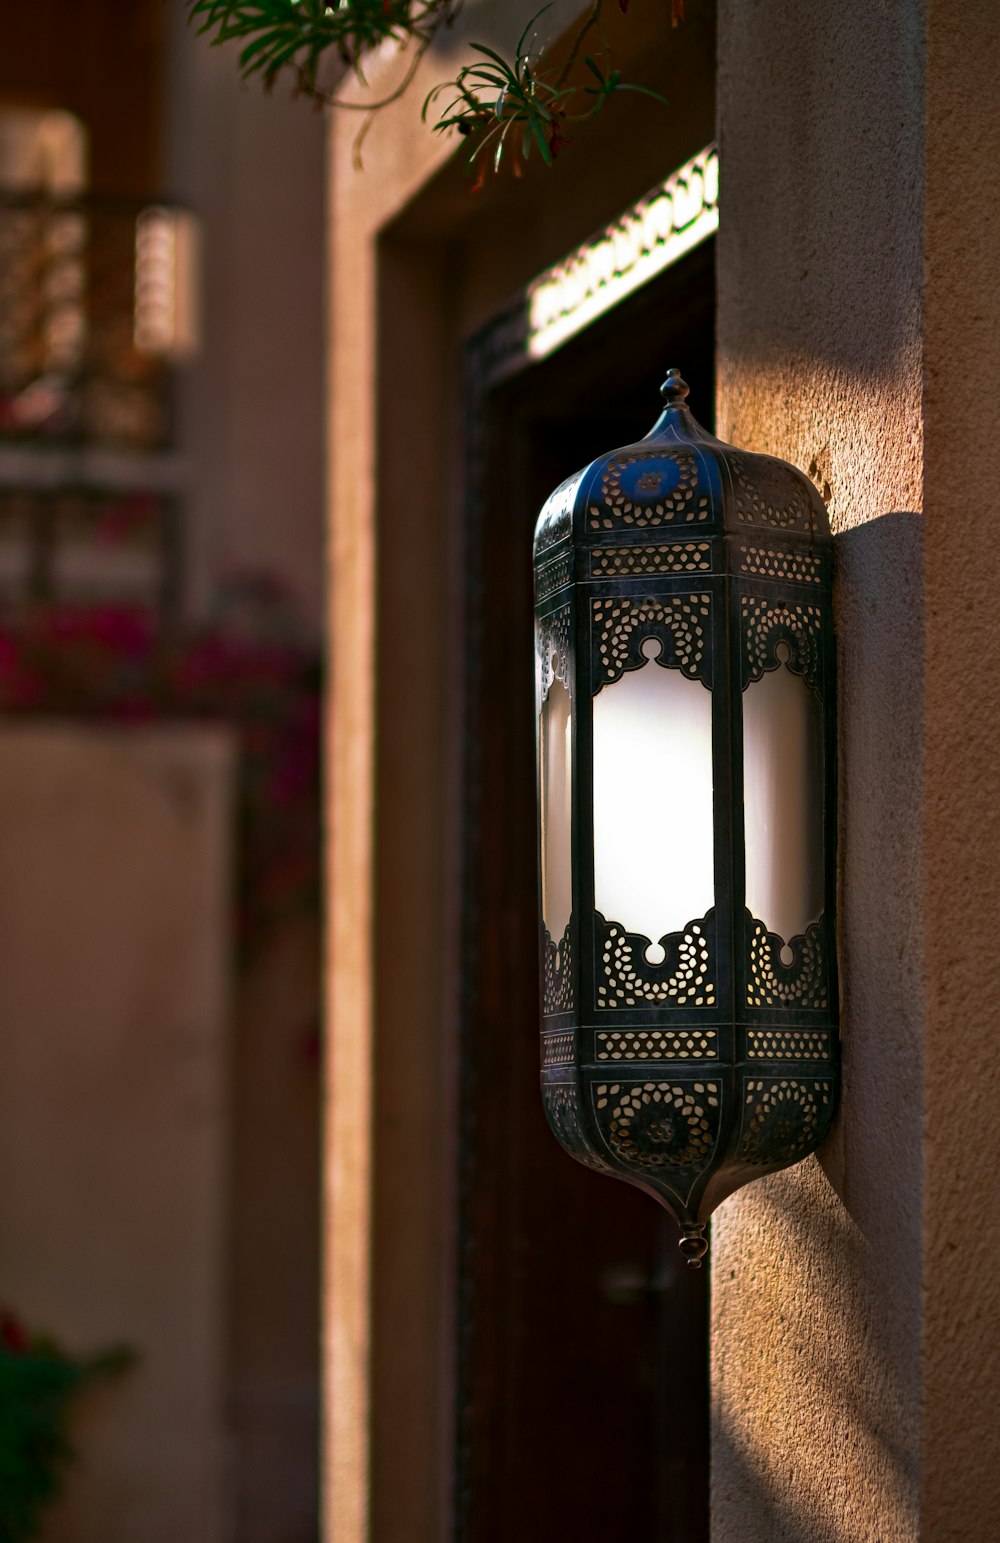 Competencia cuchara invierno 30,000+ Arabic Lamp Pictures | Download Free Images on Unsplash